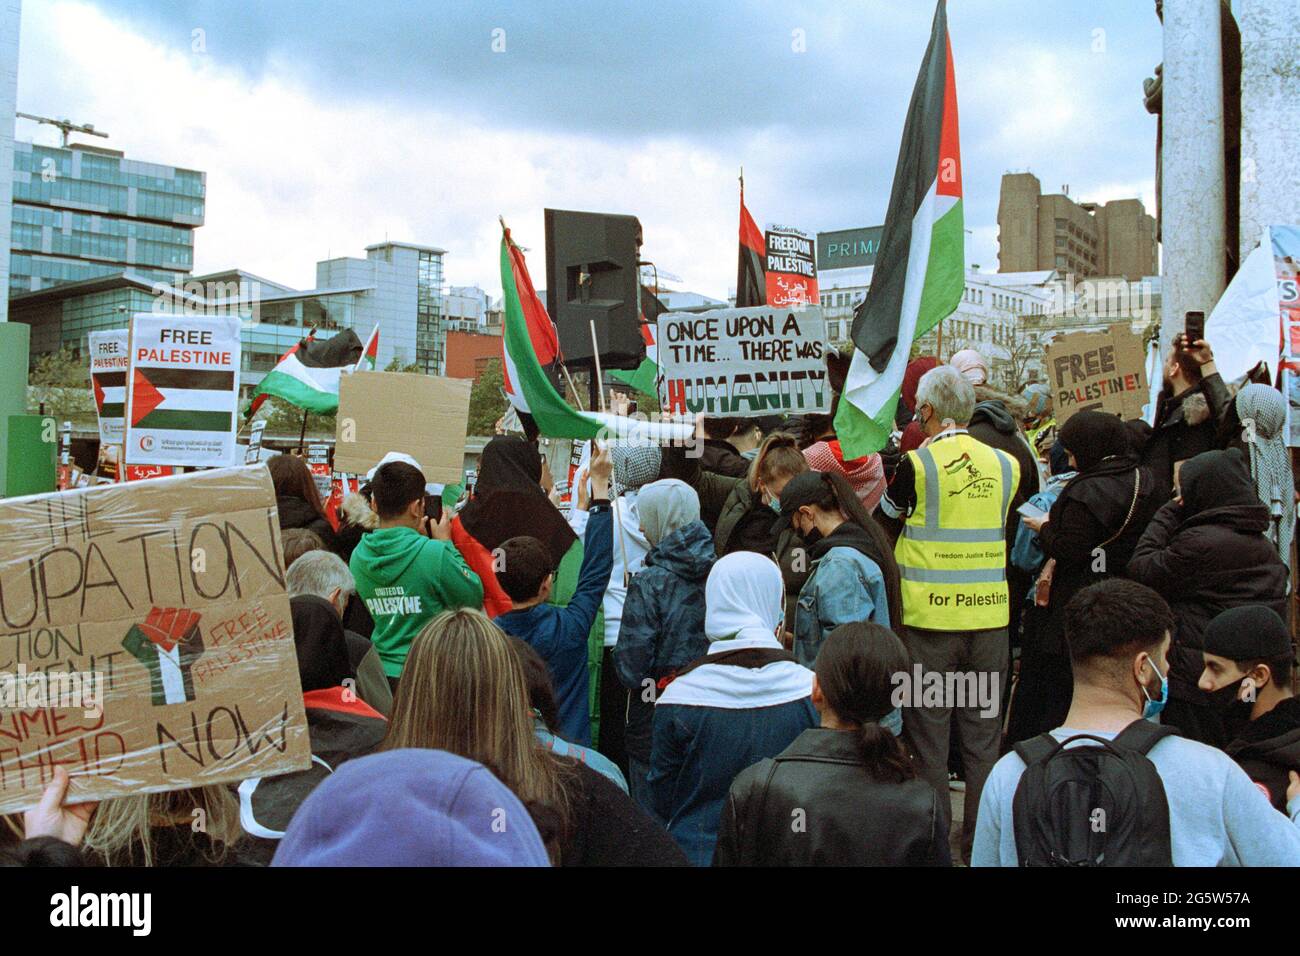 Manchester, UK - 22 May 2021: People at Piccadilly Gardens to protest the action on Gaza. Stock Photo